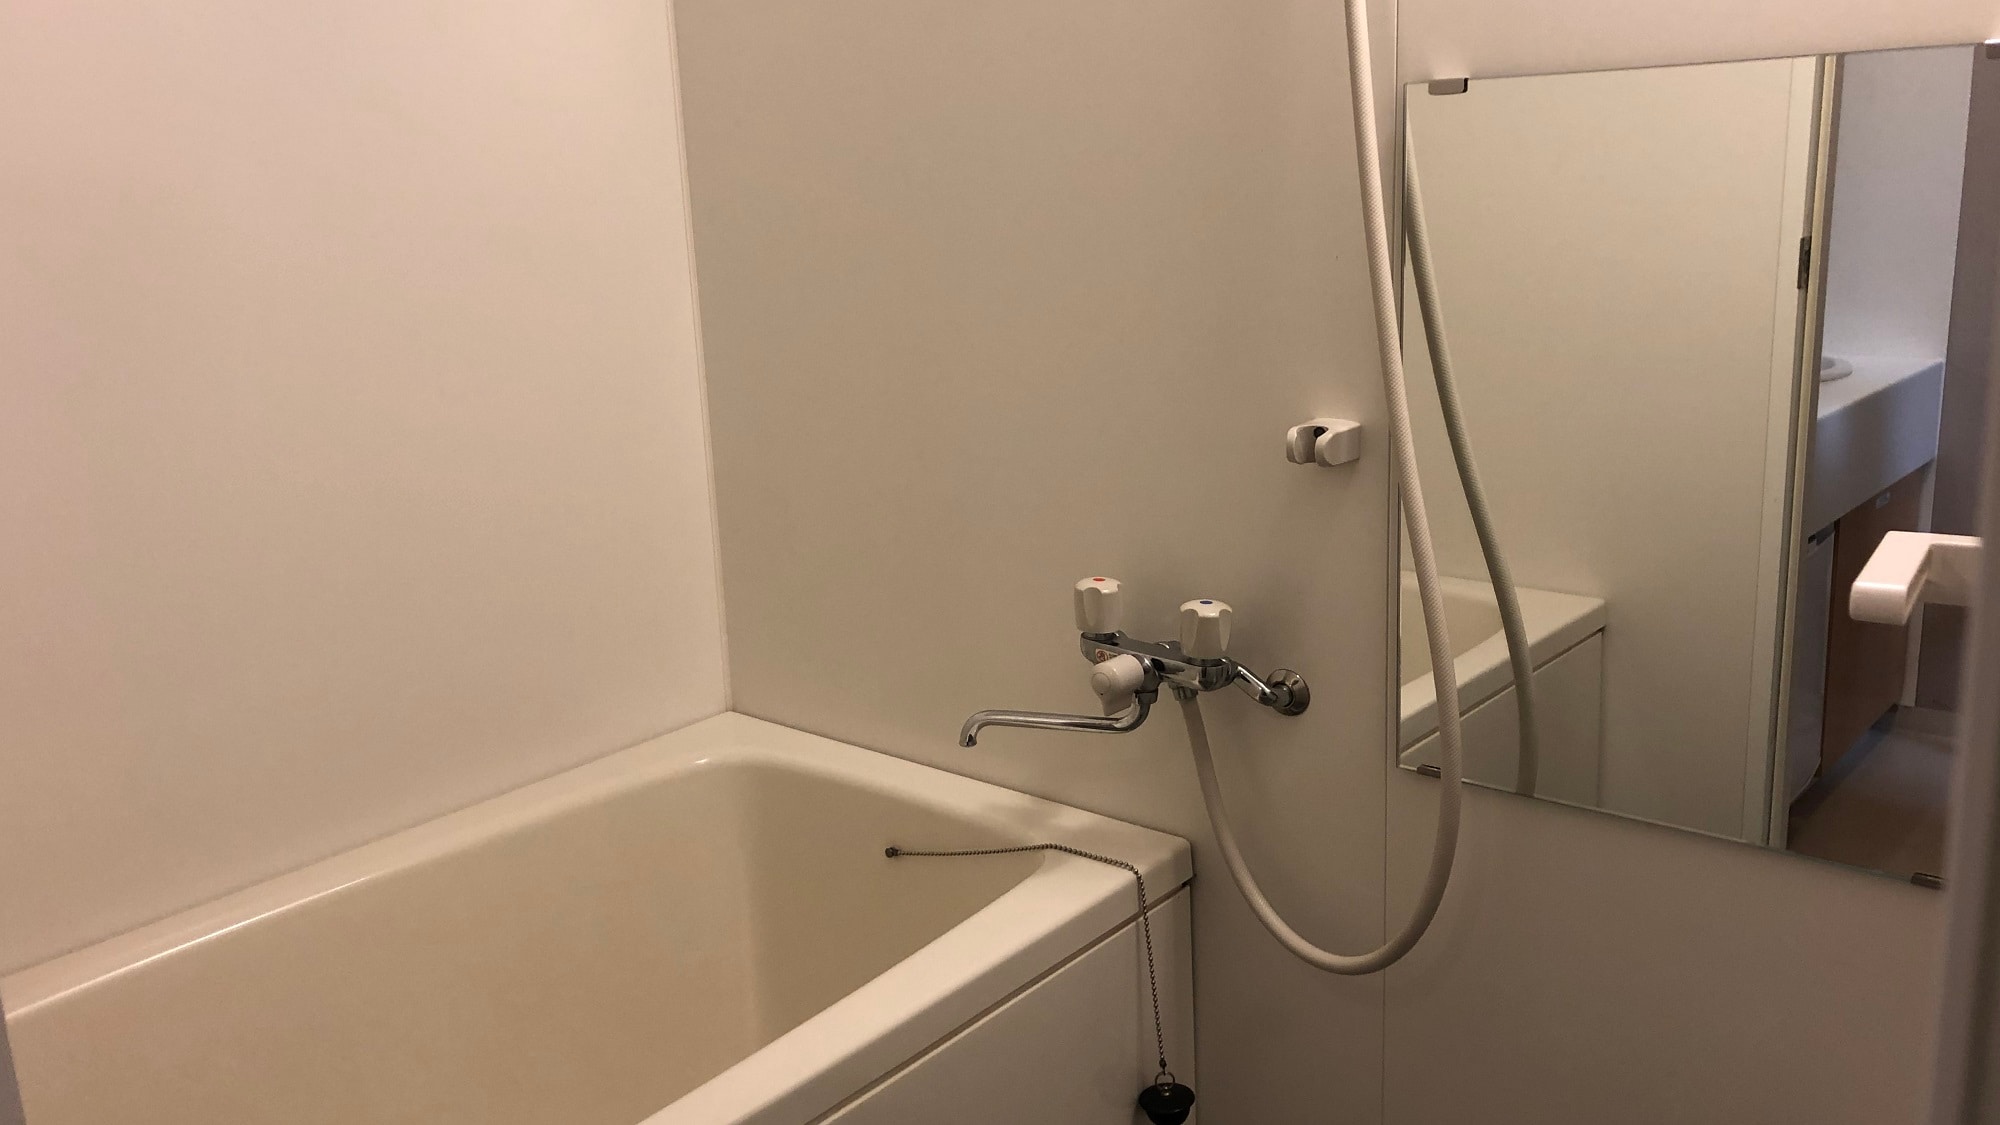 ◆ Guest room unit bath (Japanese and Western rooms only)